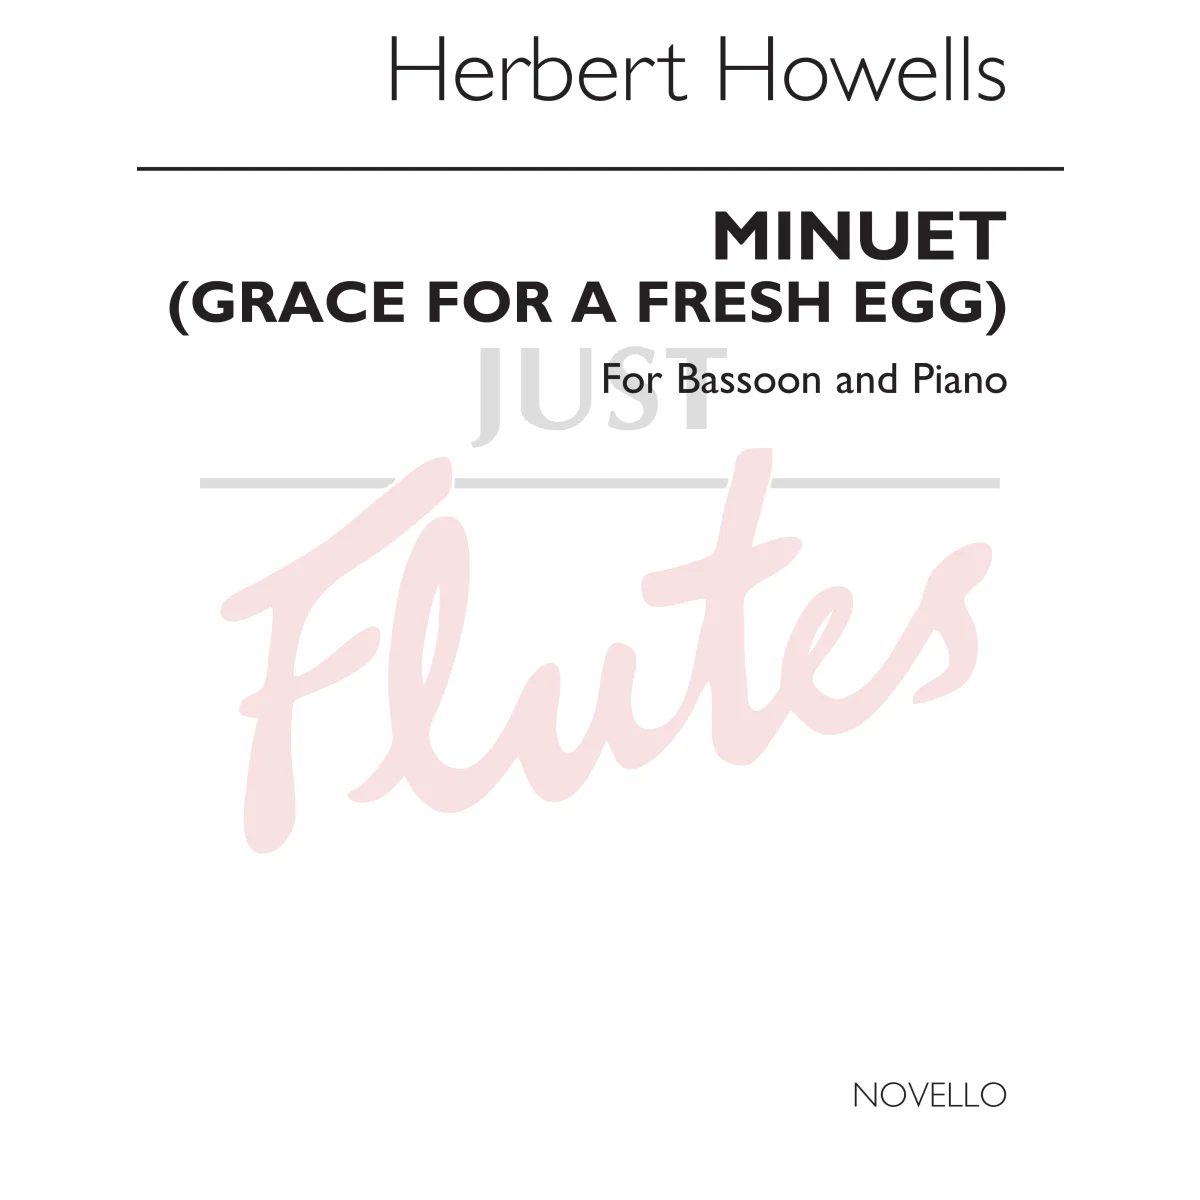 Minuet (Grace for a Fresh Egg) for Bassoon and Piano